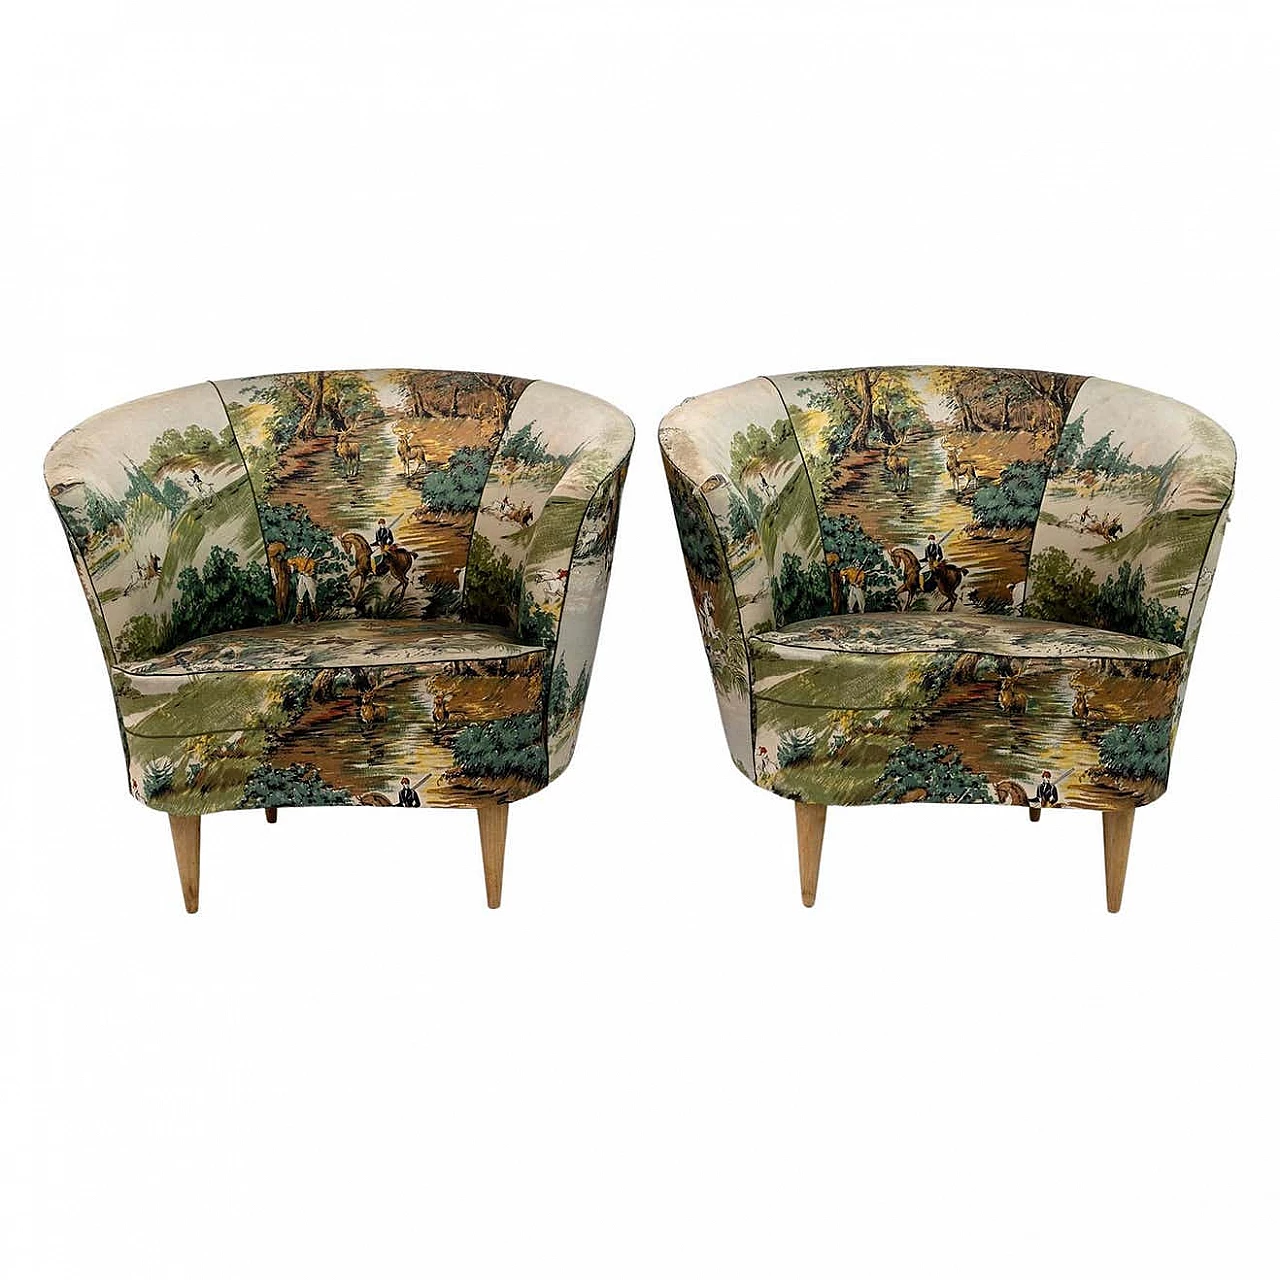 Pair of armchairs in the style of Gio Ponti for Casa e Giardino, 1950s 1